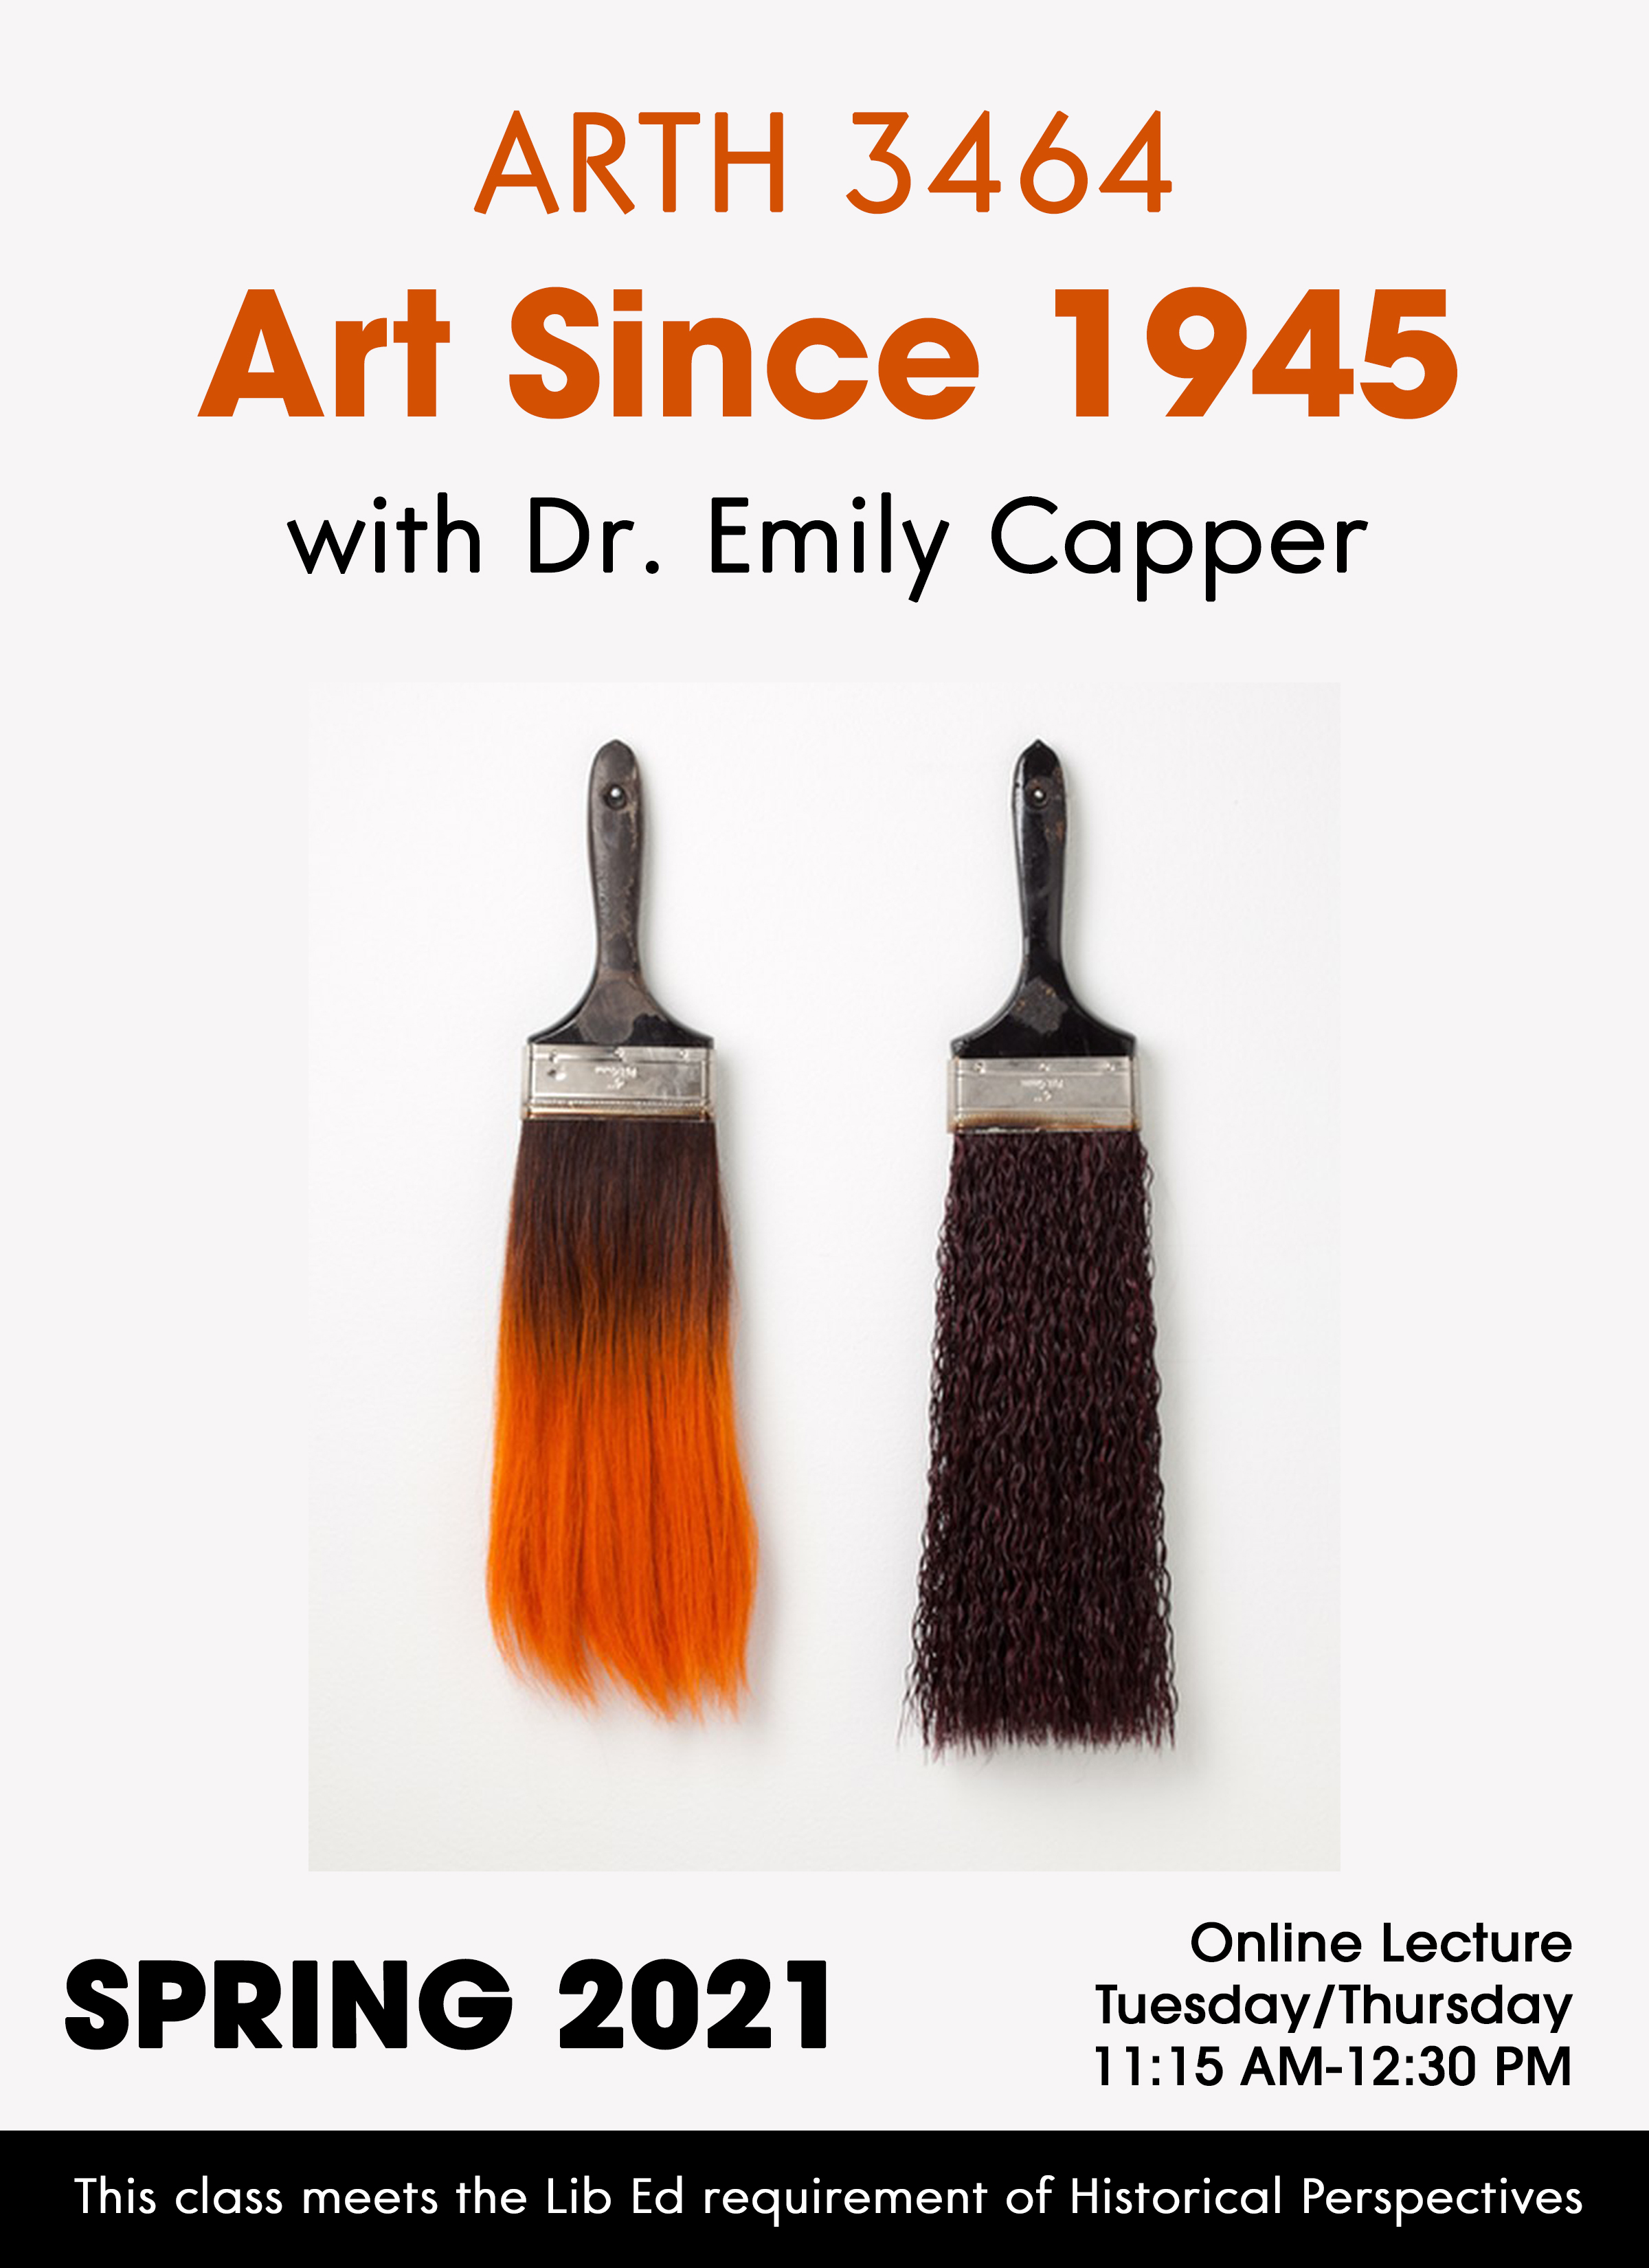 Course poster ARTH 3464 Art Since 1945 with Dr. Emily Capper. Image of two paint brushes. Spring 2021. Online lecture 11:15am-12:30pmTues/Thurs. This class meets the Lib Ed requirement of Historical Perspectives.